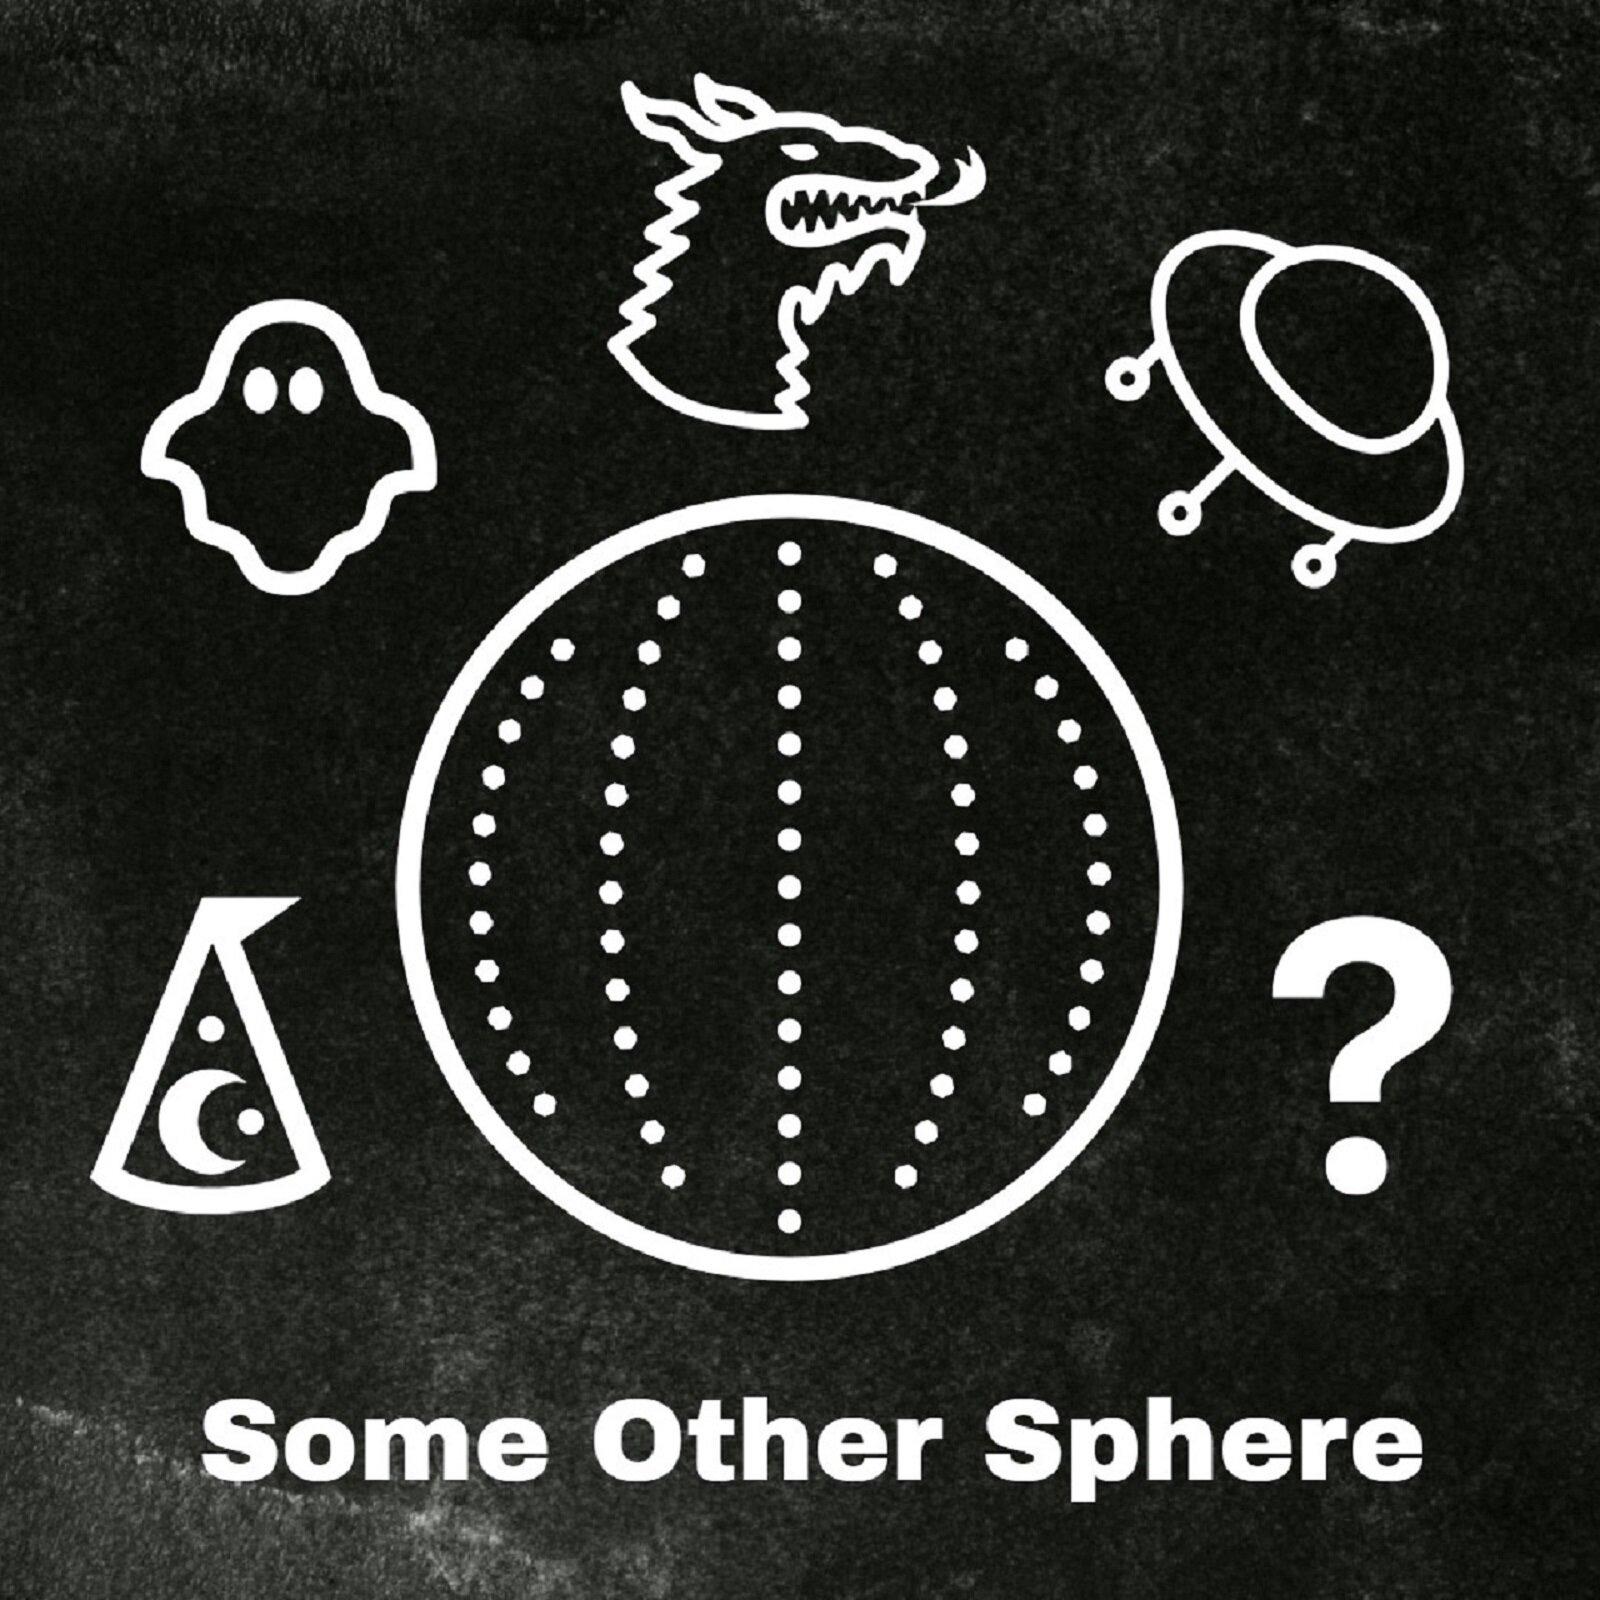 Podcast Interview: Some Other Sphere